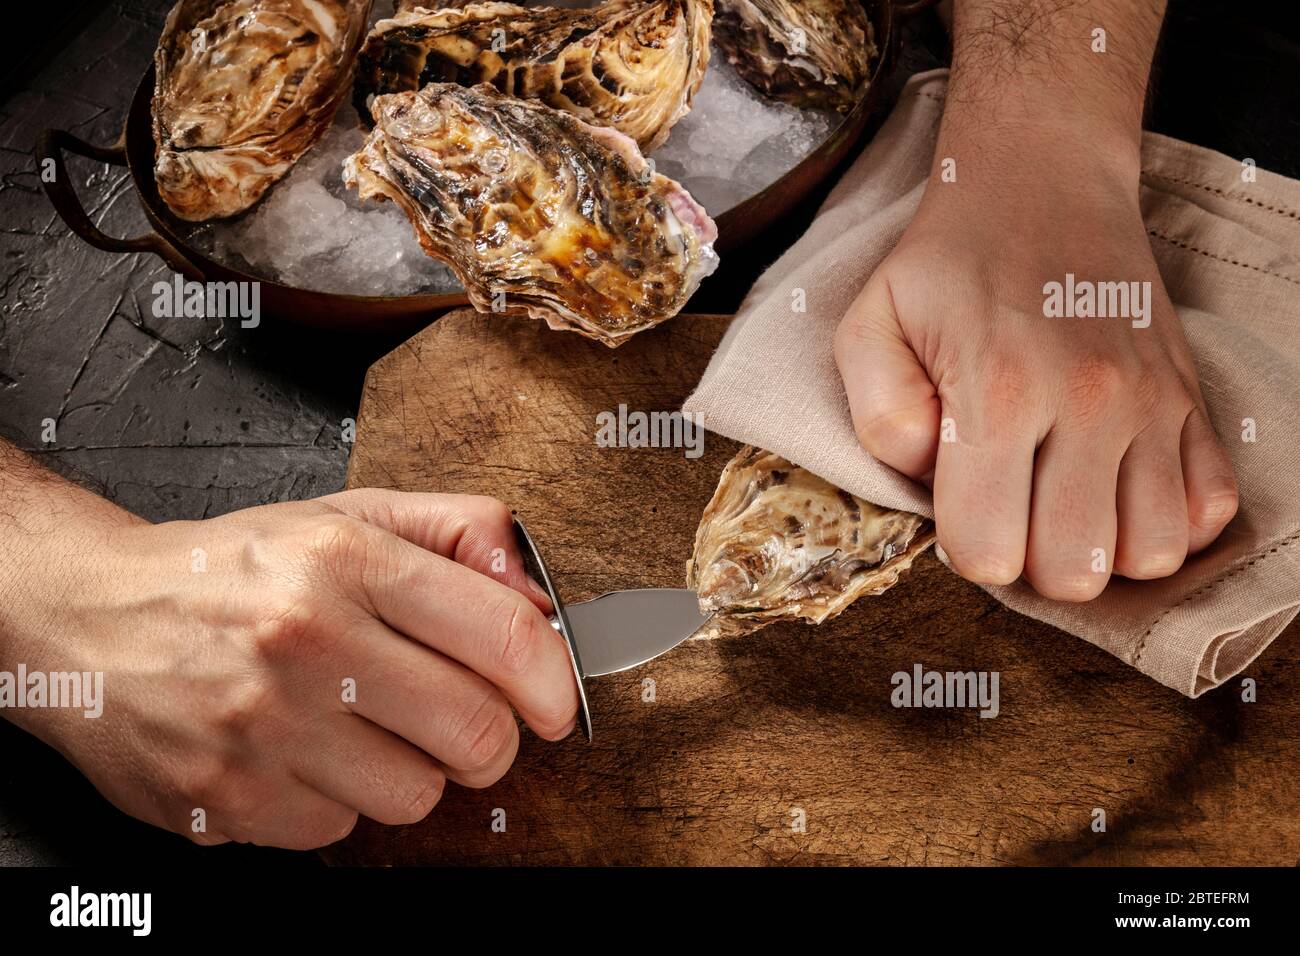 Shucking an oyster, man's hands with a special knife, opening oysters on a wooden board Stock Photo